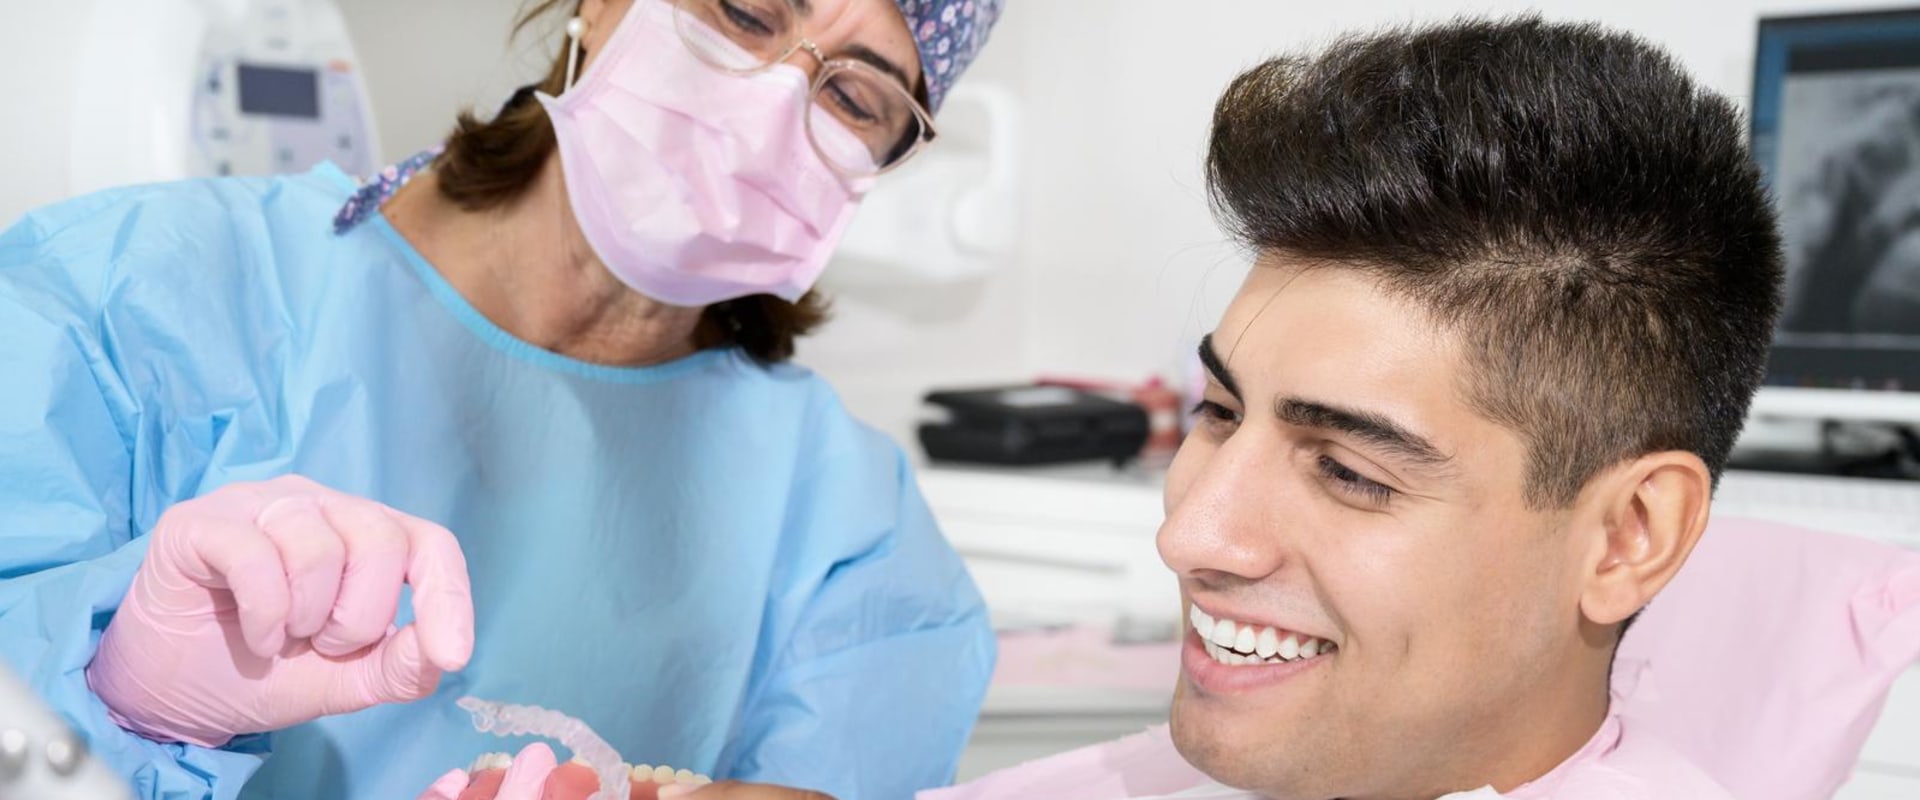 What Are The Benefits Of Choosing A Cosmetic Dentist Specializing In Periodontics In Austin, Texas?